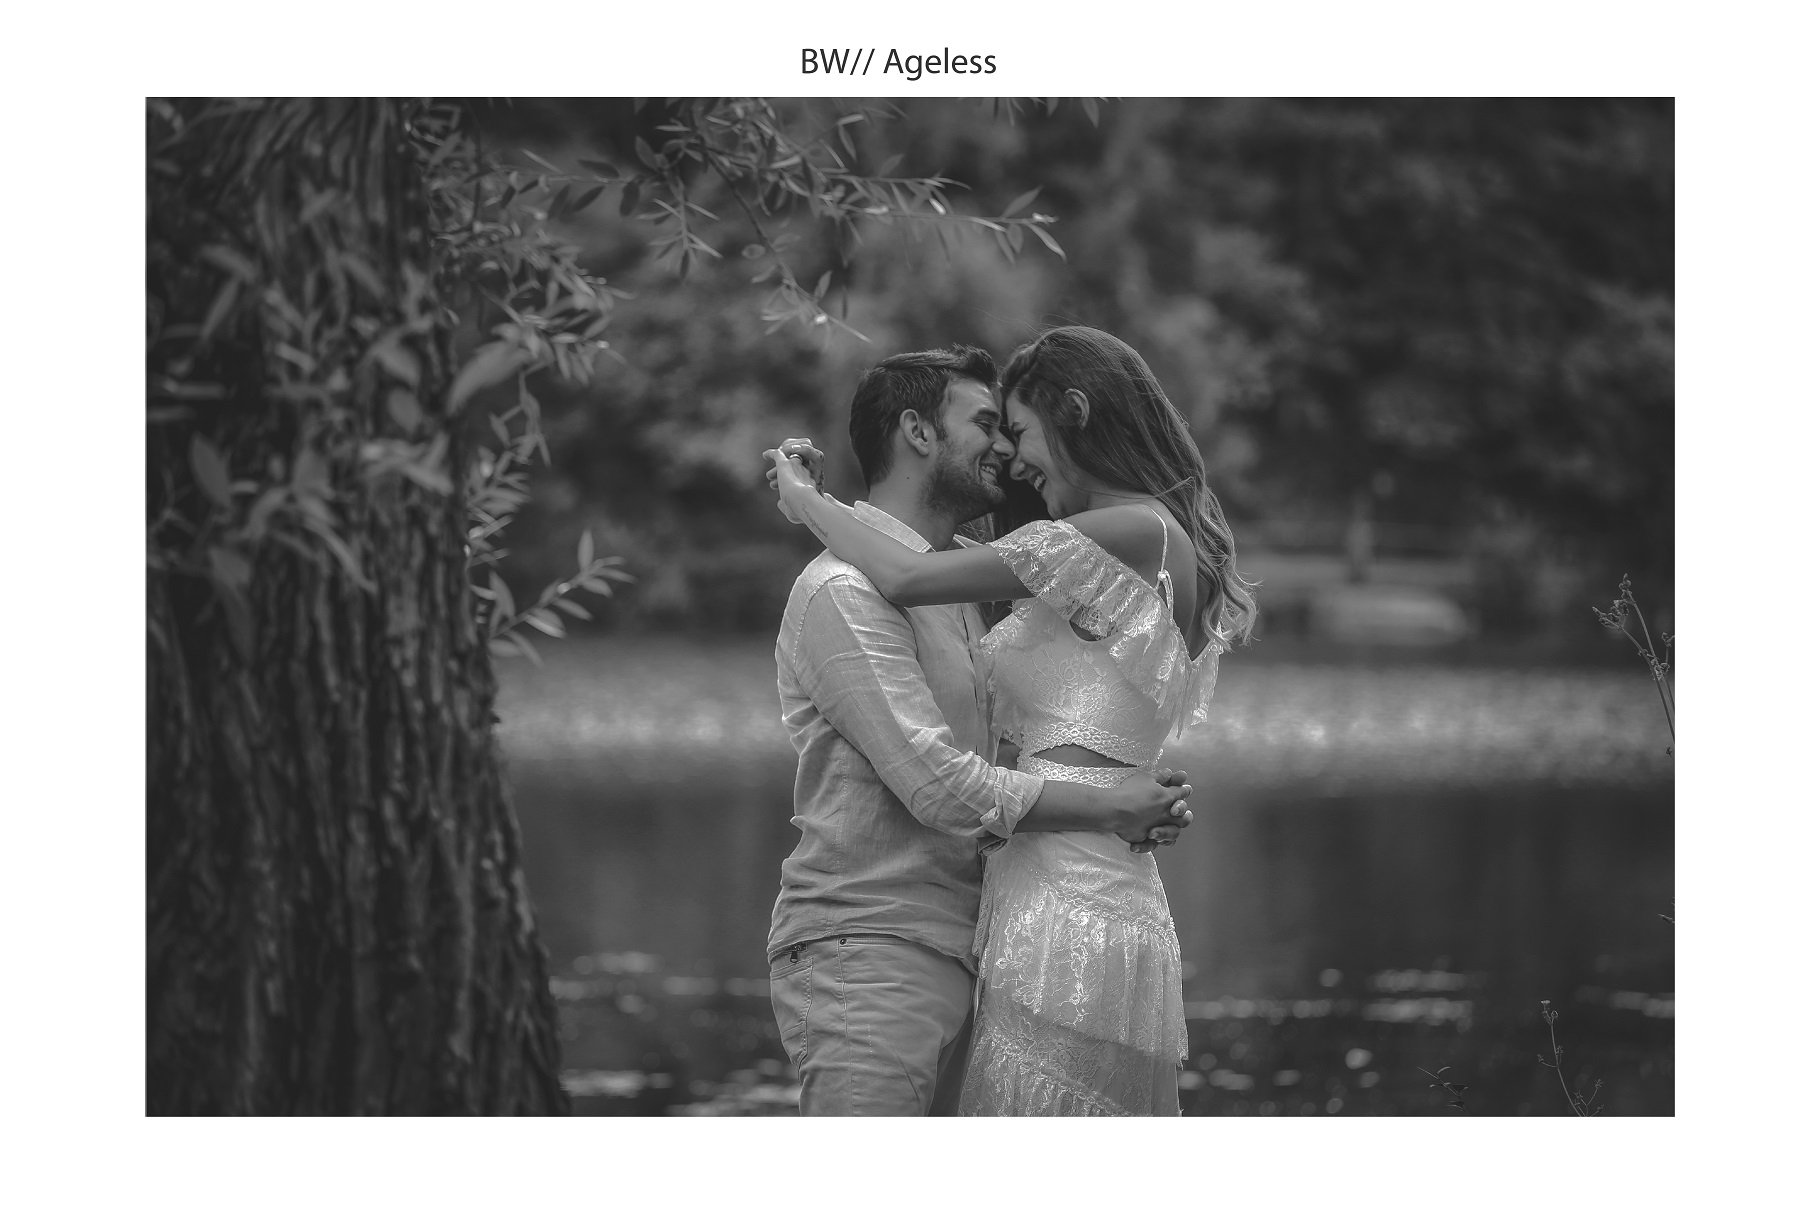 bw collection for lightroom and photoshop03 01 152